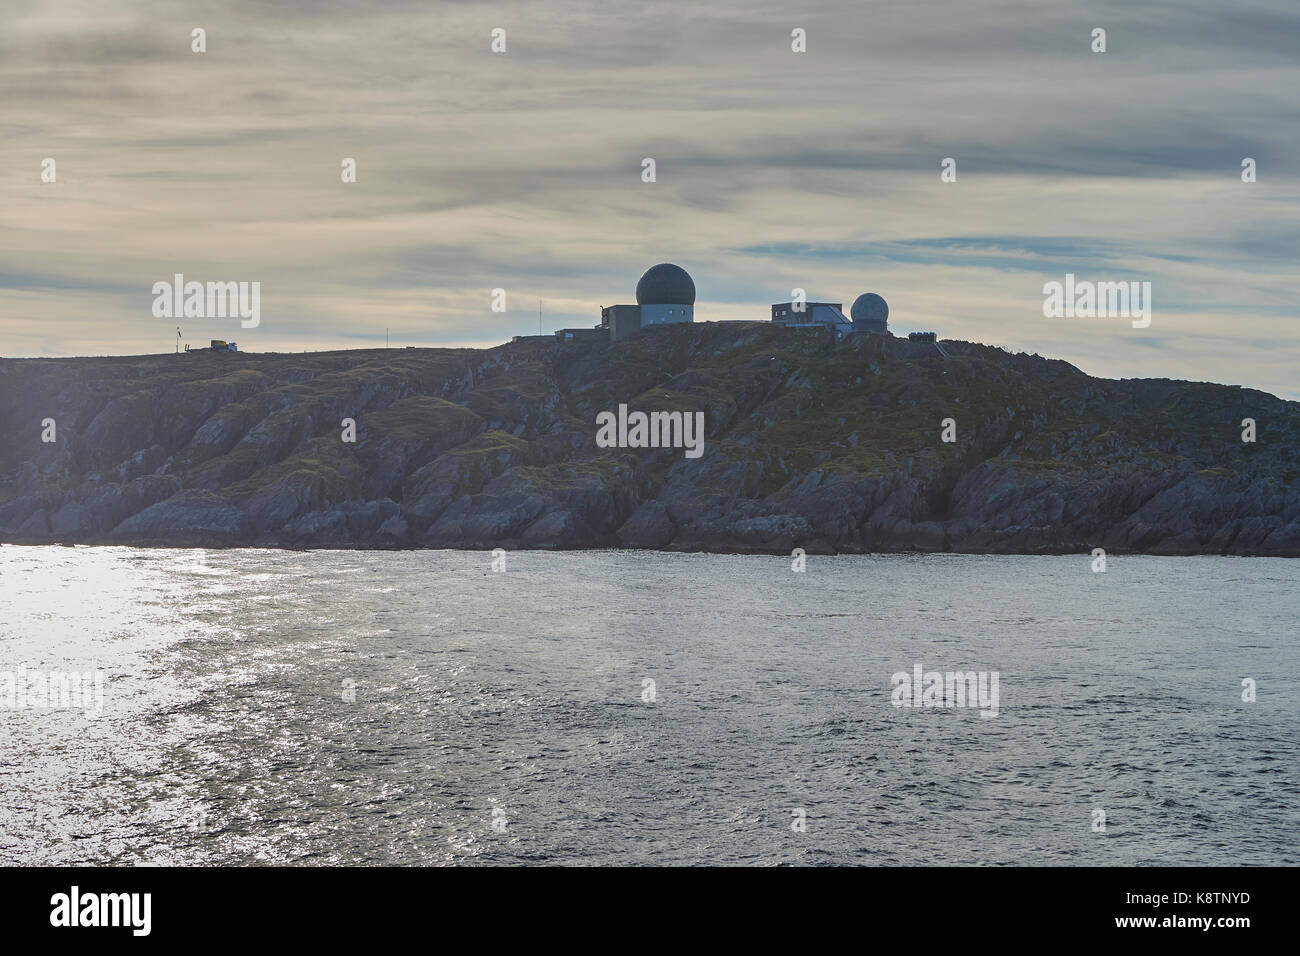 The Radar Domes Of The Norwegian Intelligence Service Globus II Radar  System Located In Vardø On The Eastern Coast Of Northern Norway Stock Photo  - Alamy